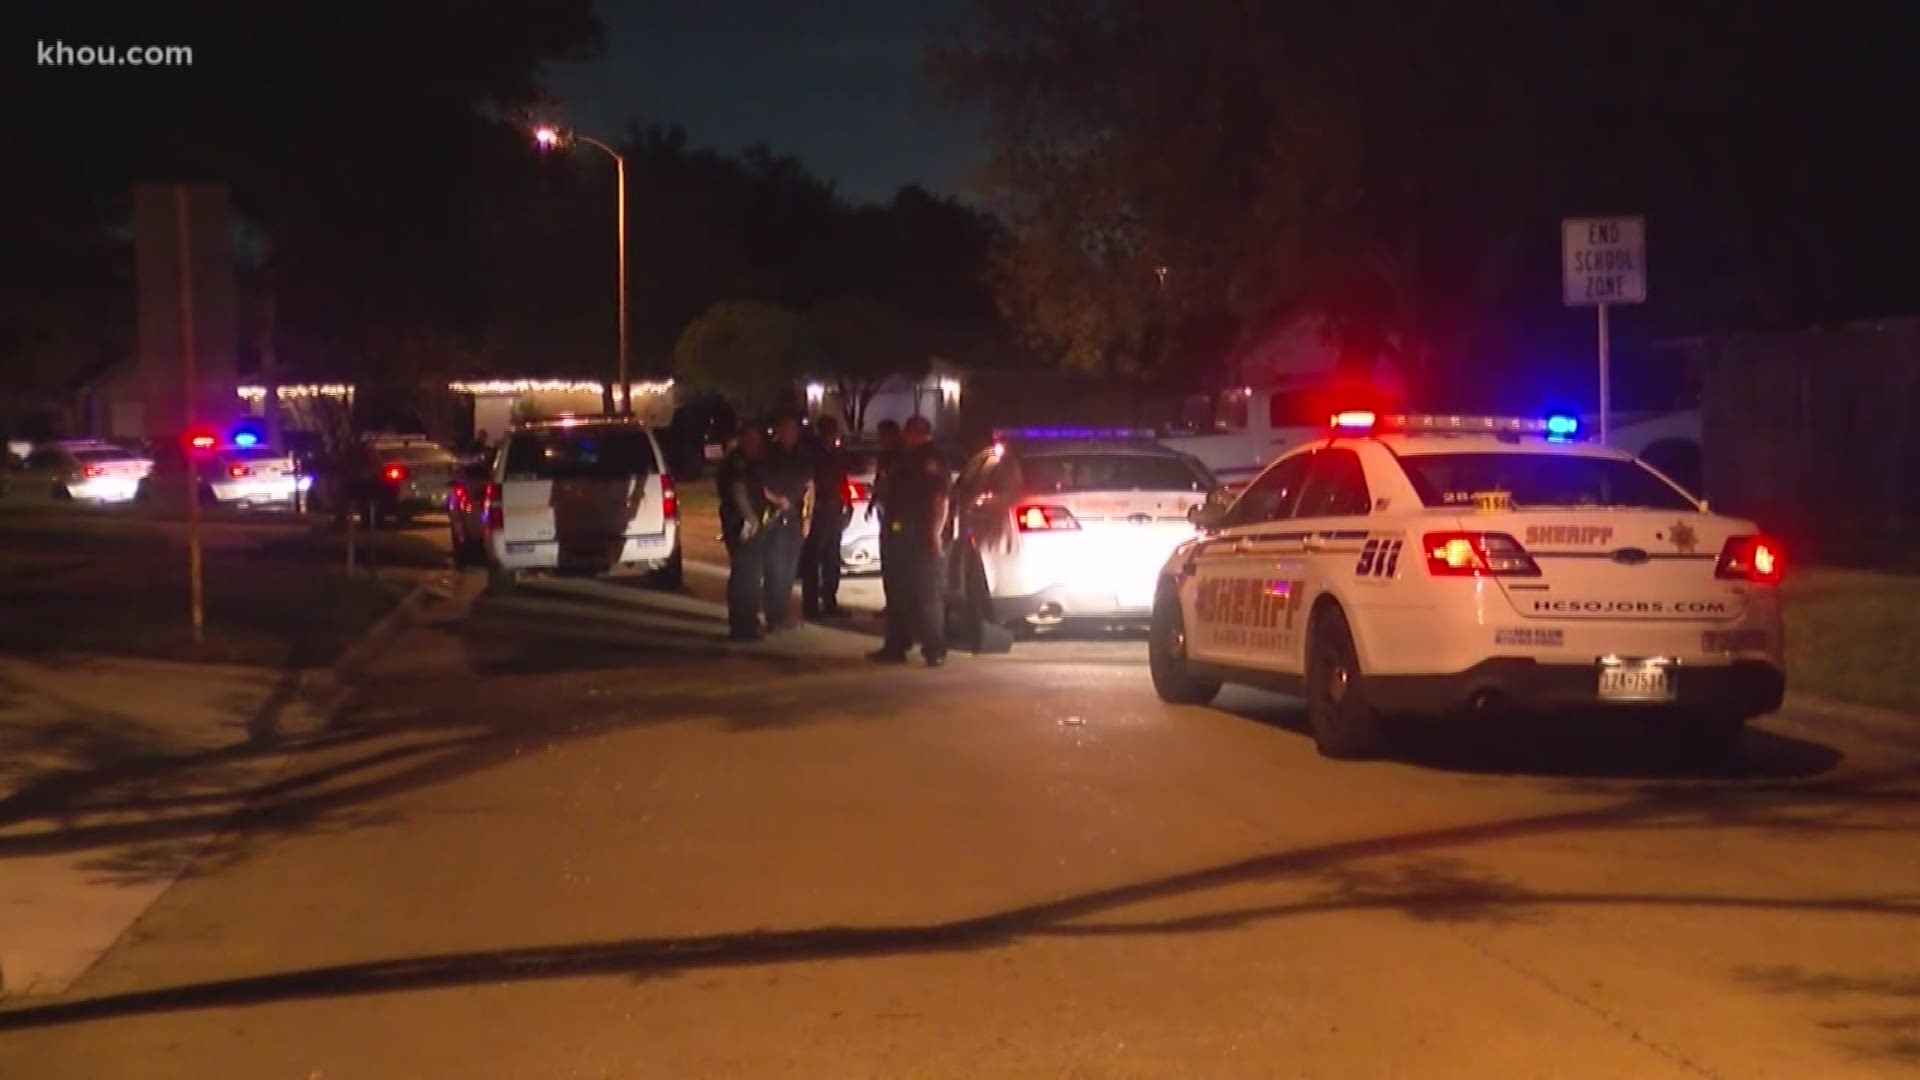 A 14-year-old boy is in custody after authorities said he shot his sister's boyfriend to death during an argument at a Katy home late Saturday night.